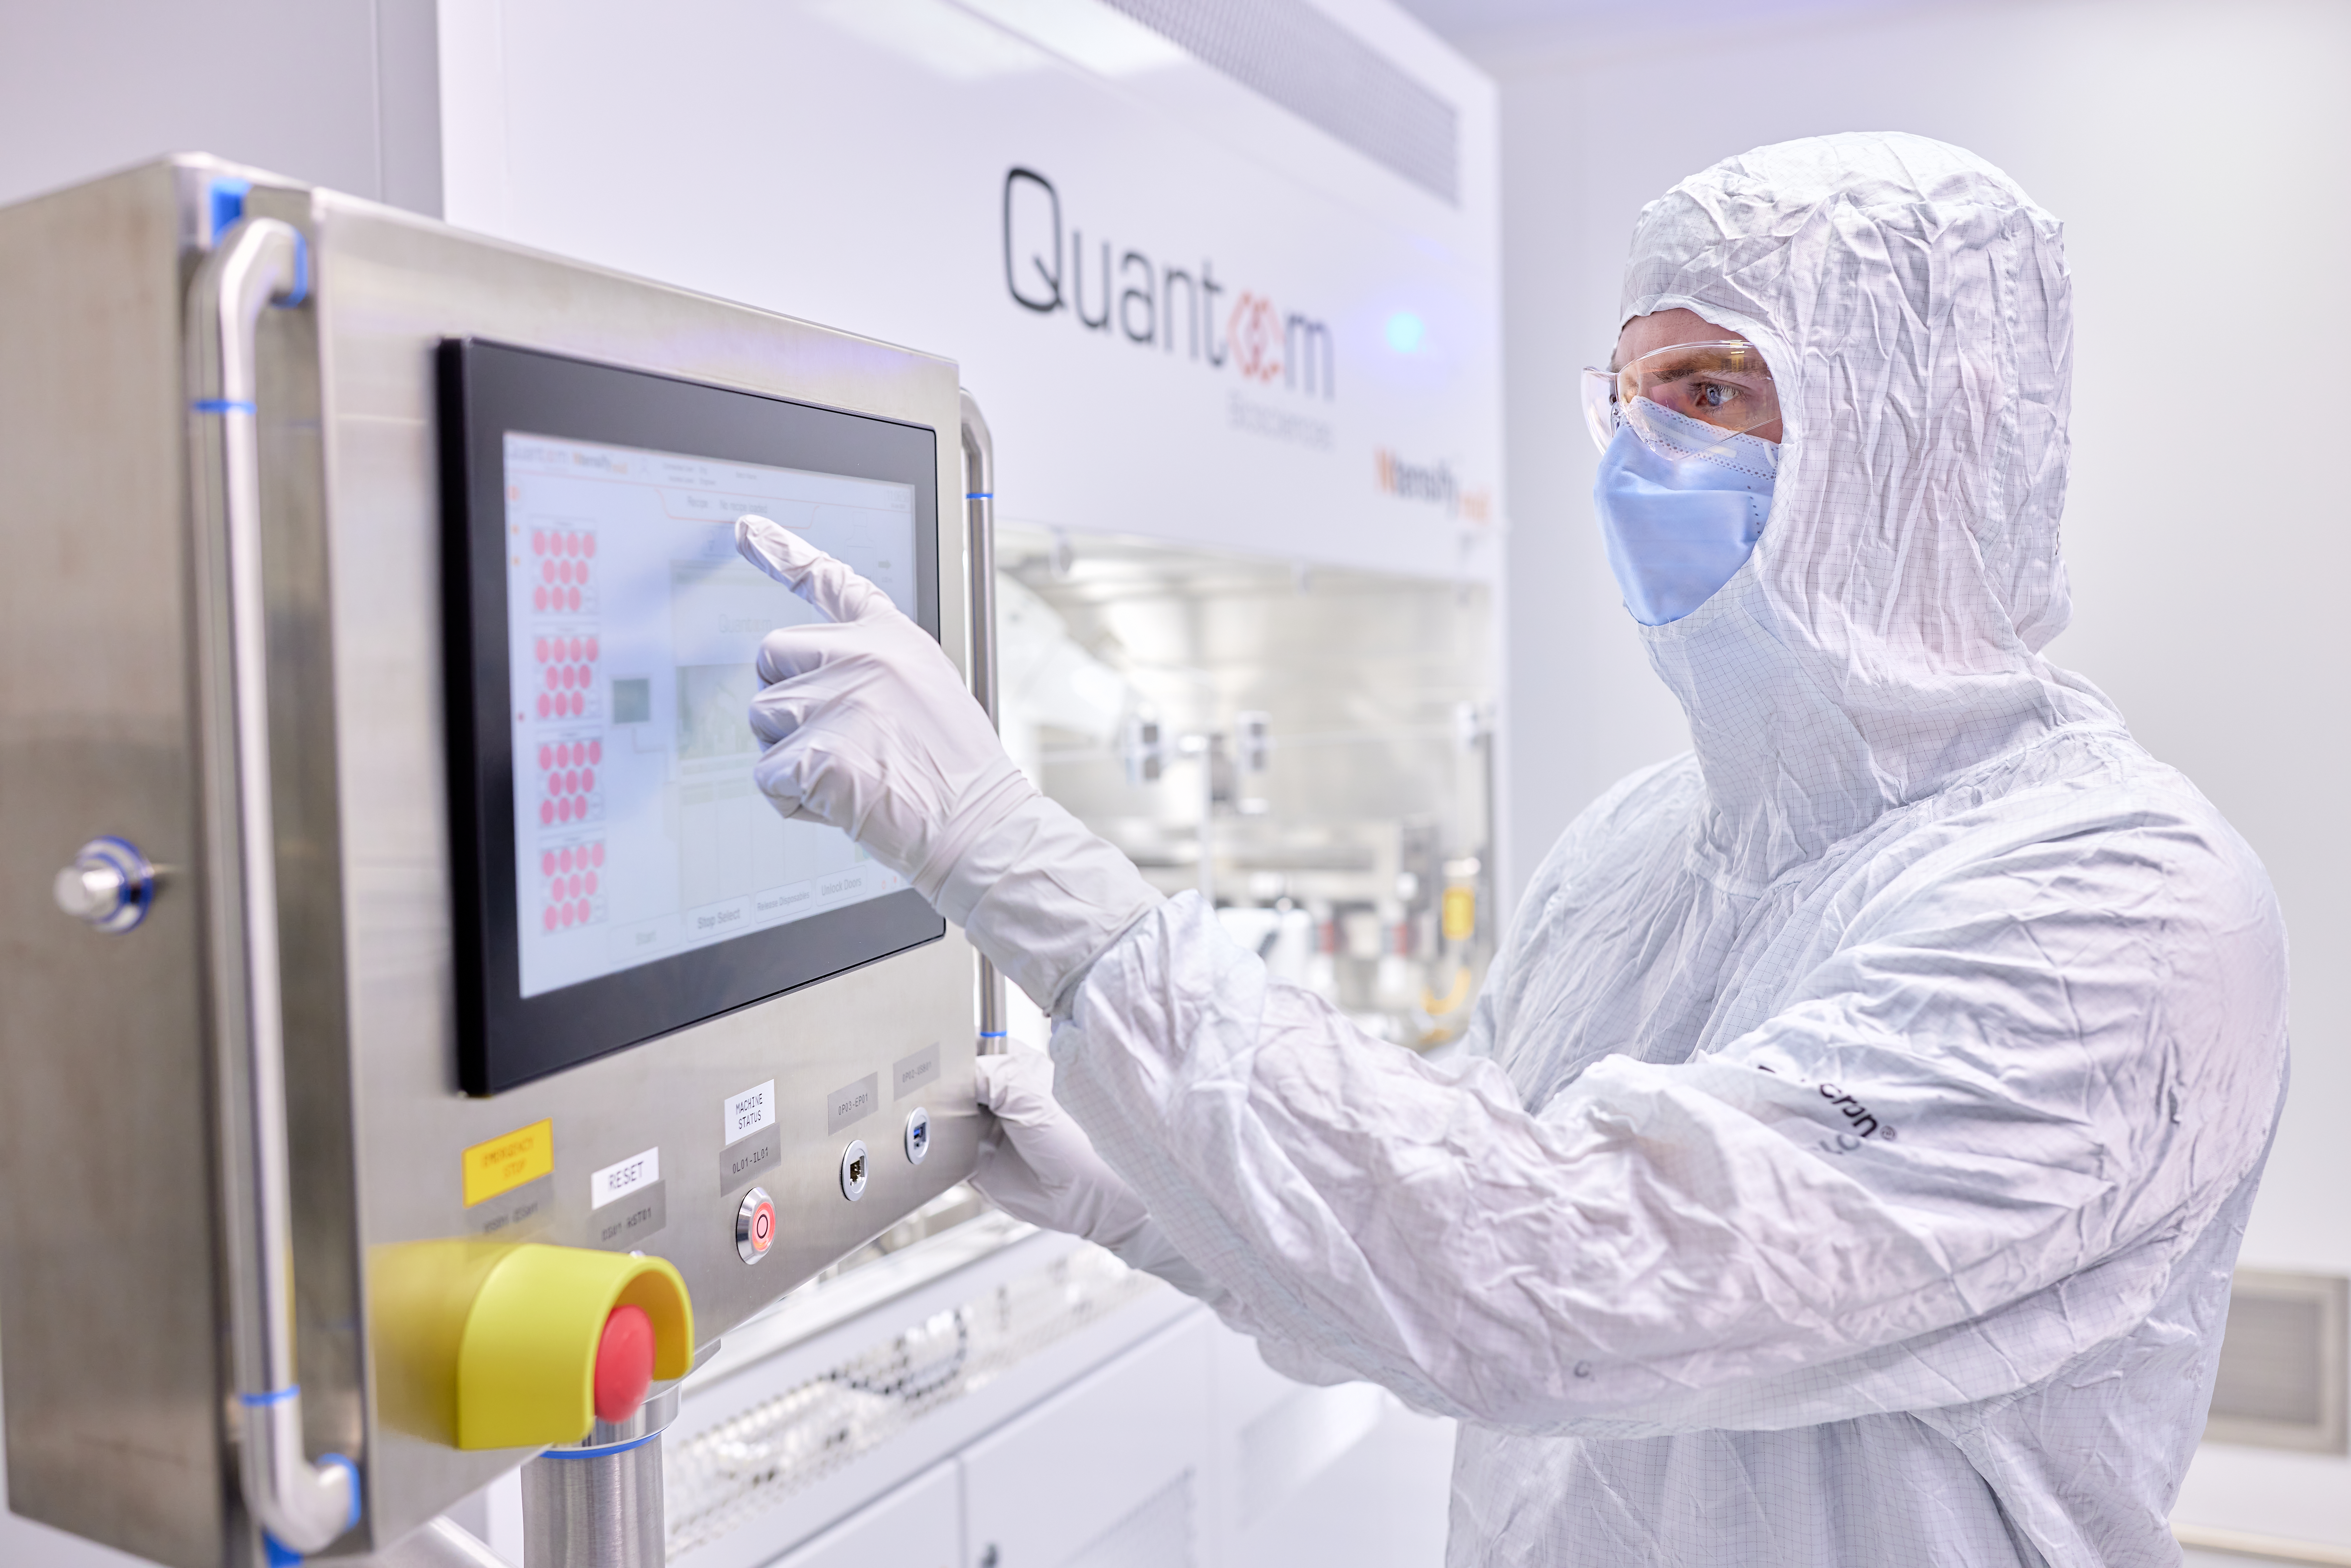 Exothera team members providing GMP manufacturing solutions for RNA therapeutics